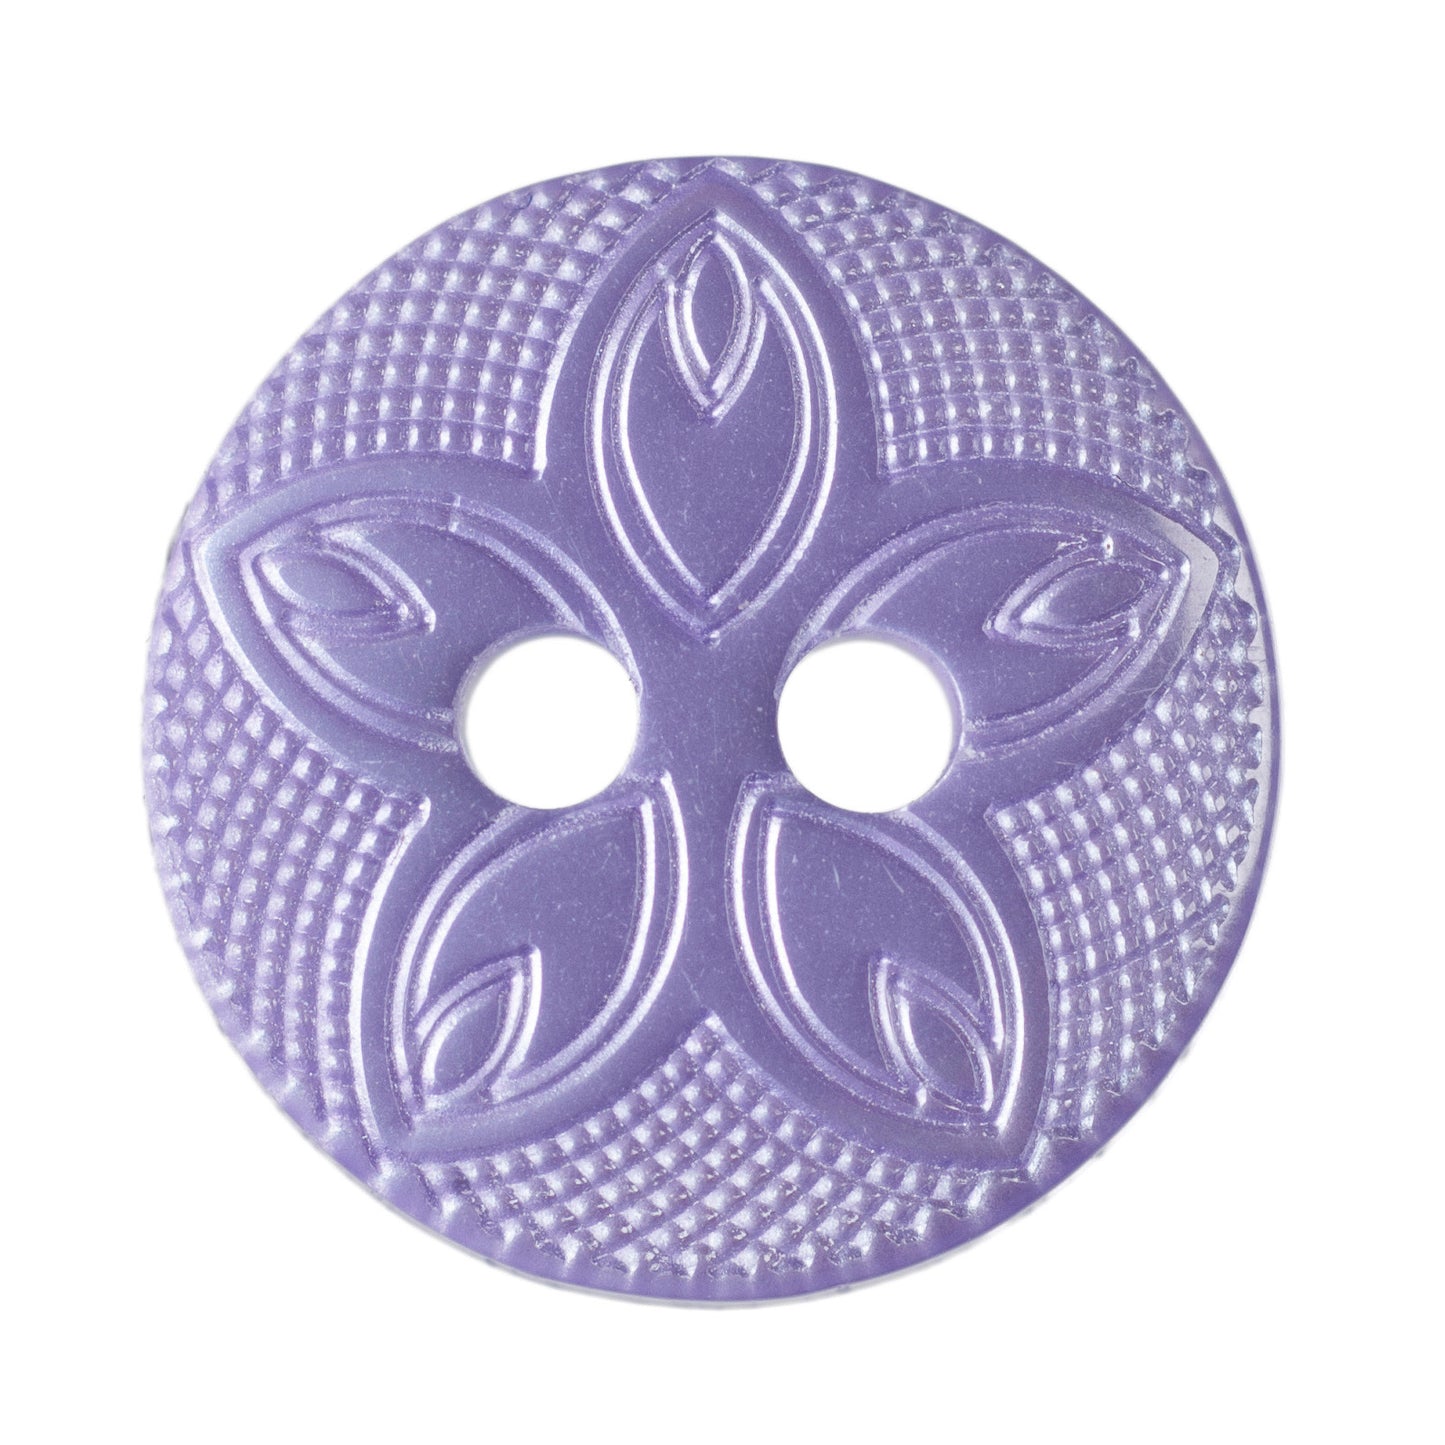 2 Hole Etched Flower Button - 12mm - Lilac